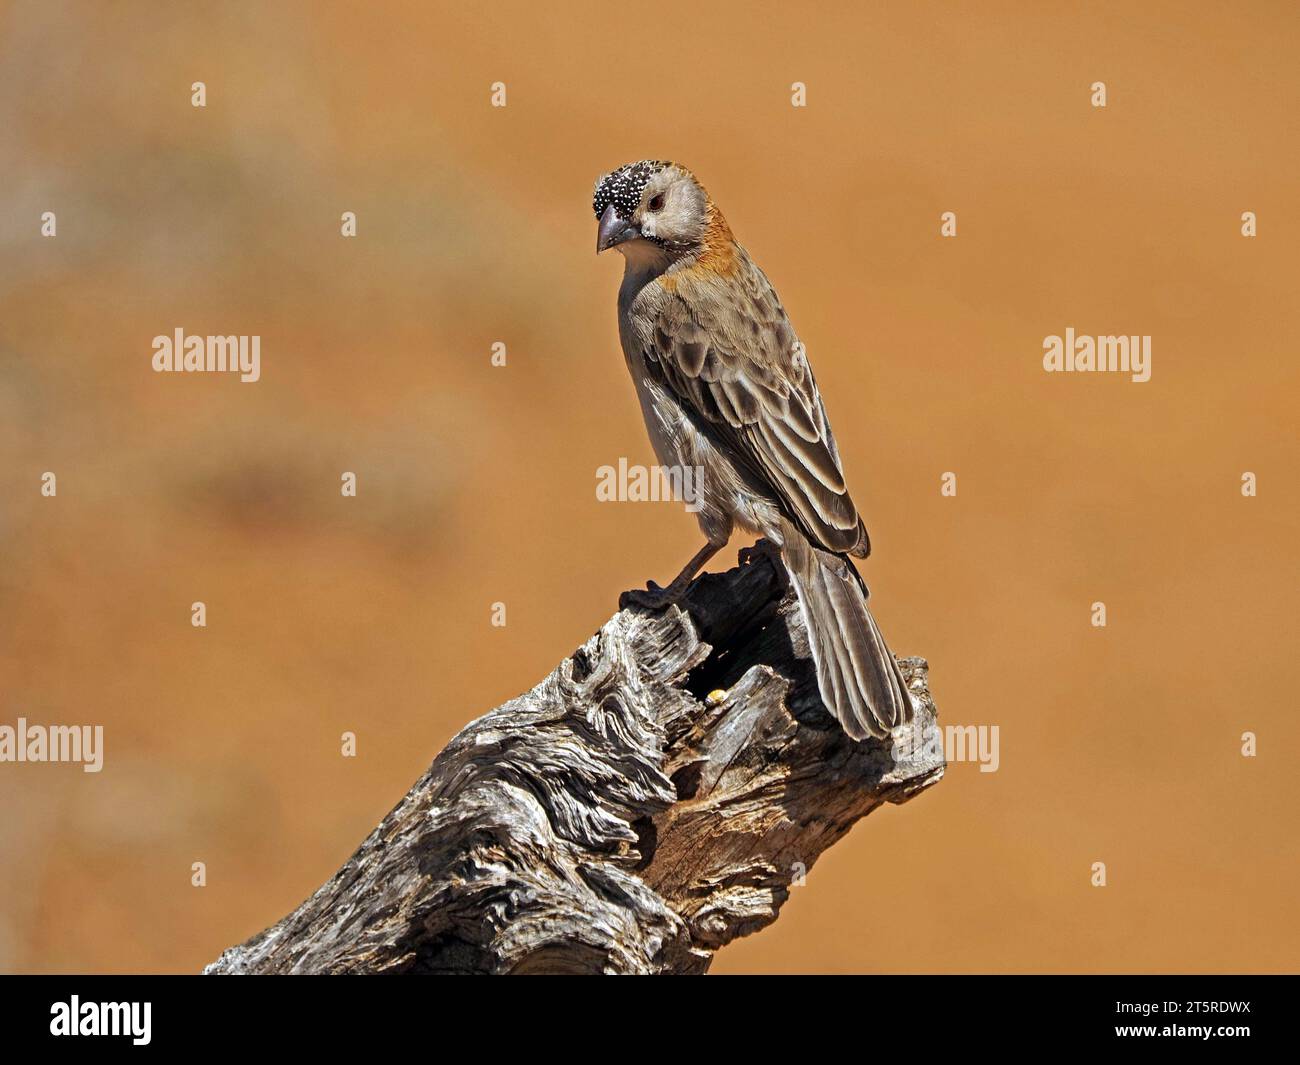 single Speckle-fronted Weaver (Sporopipes frontalis) perched on deadwood tree stump in arid dry bush of Laikiipia County Kenya,Africa Stock Photo